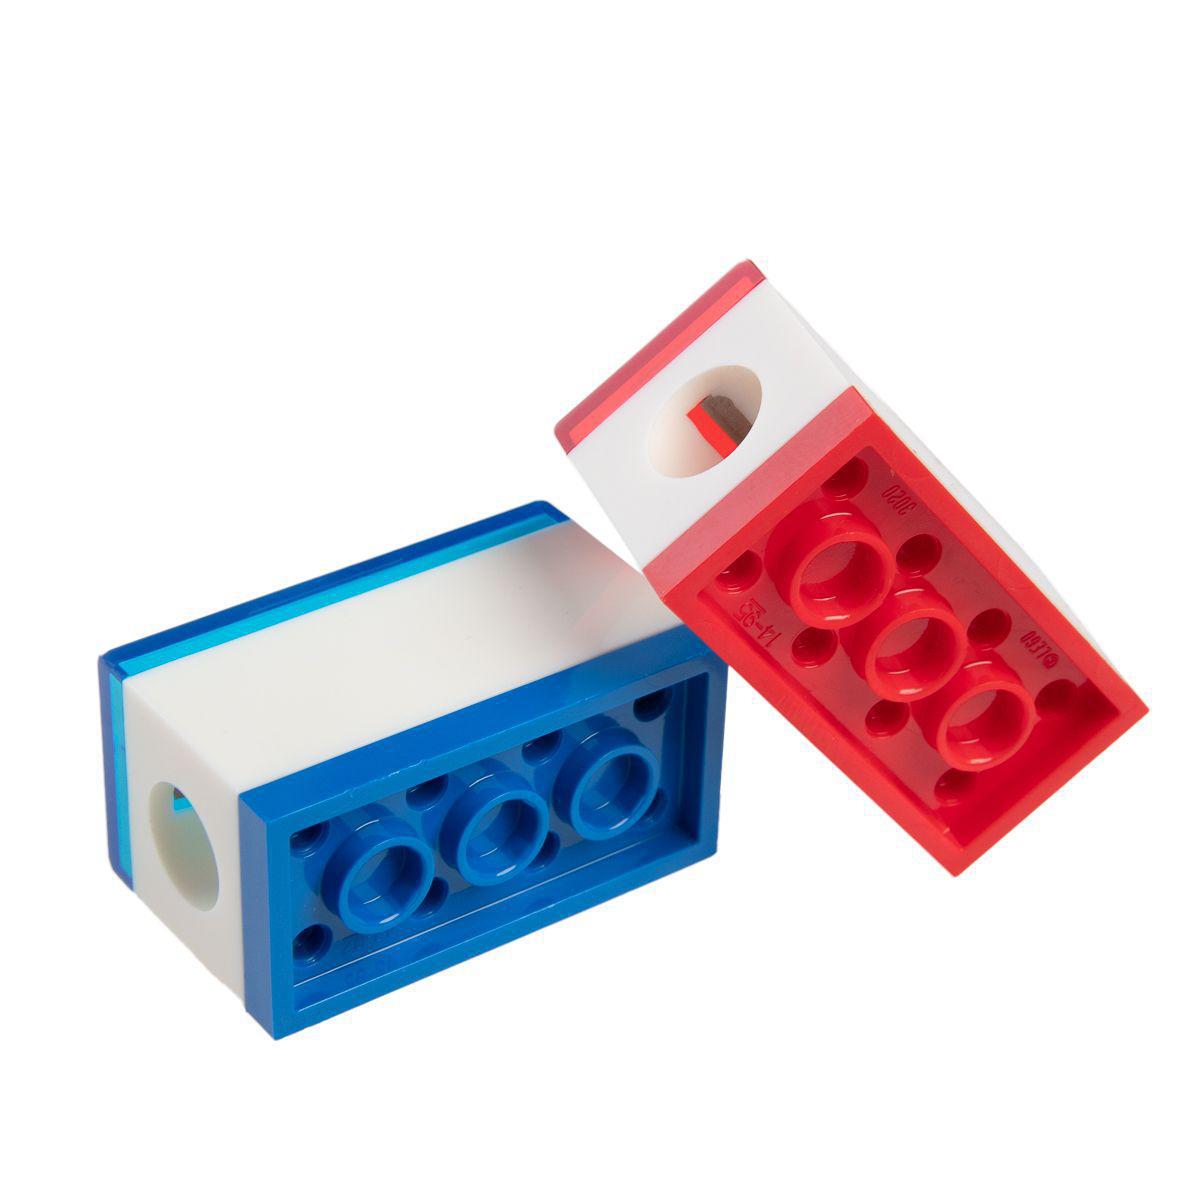 2 Pieces LEGO Pencil Sharpener Set – Stackable With LEGO Toys!